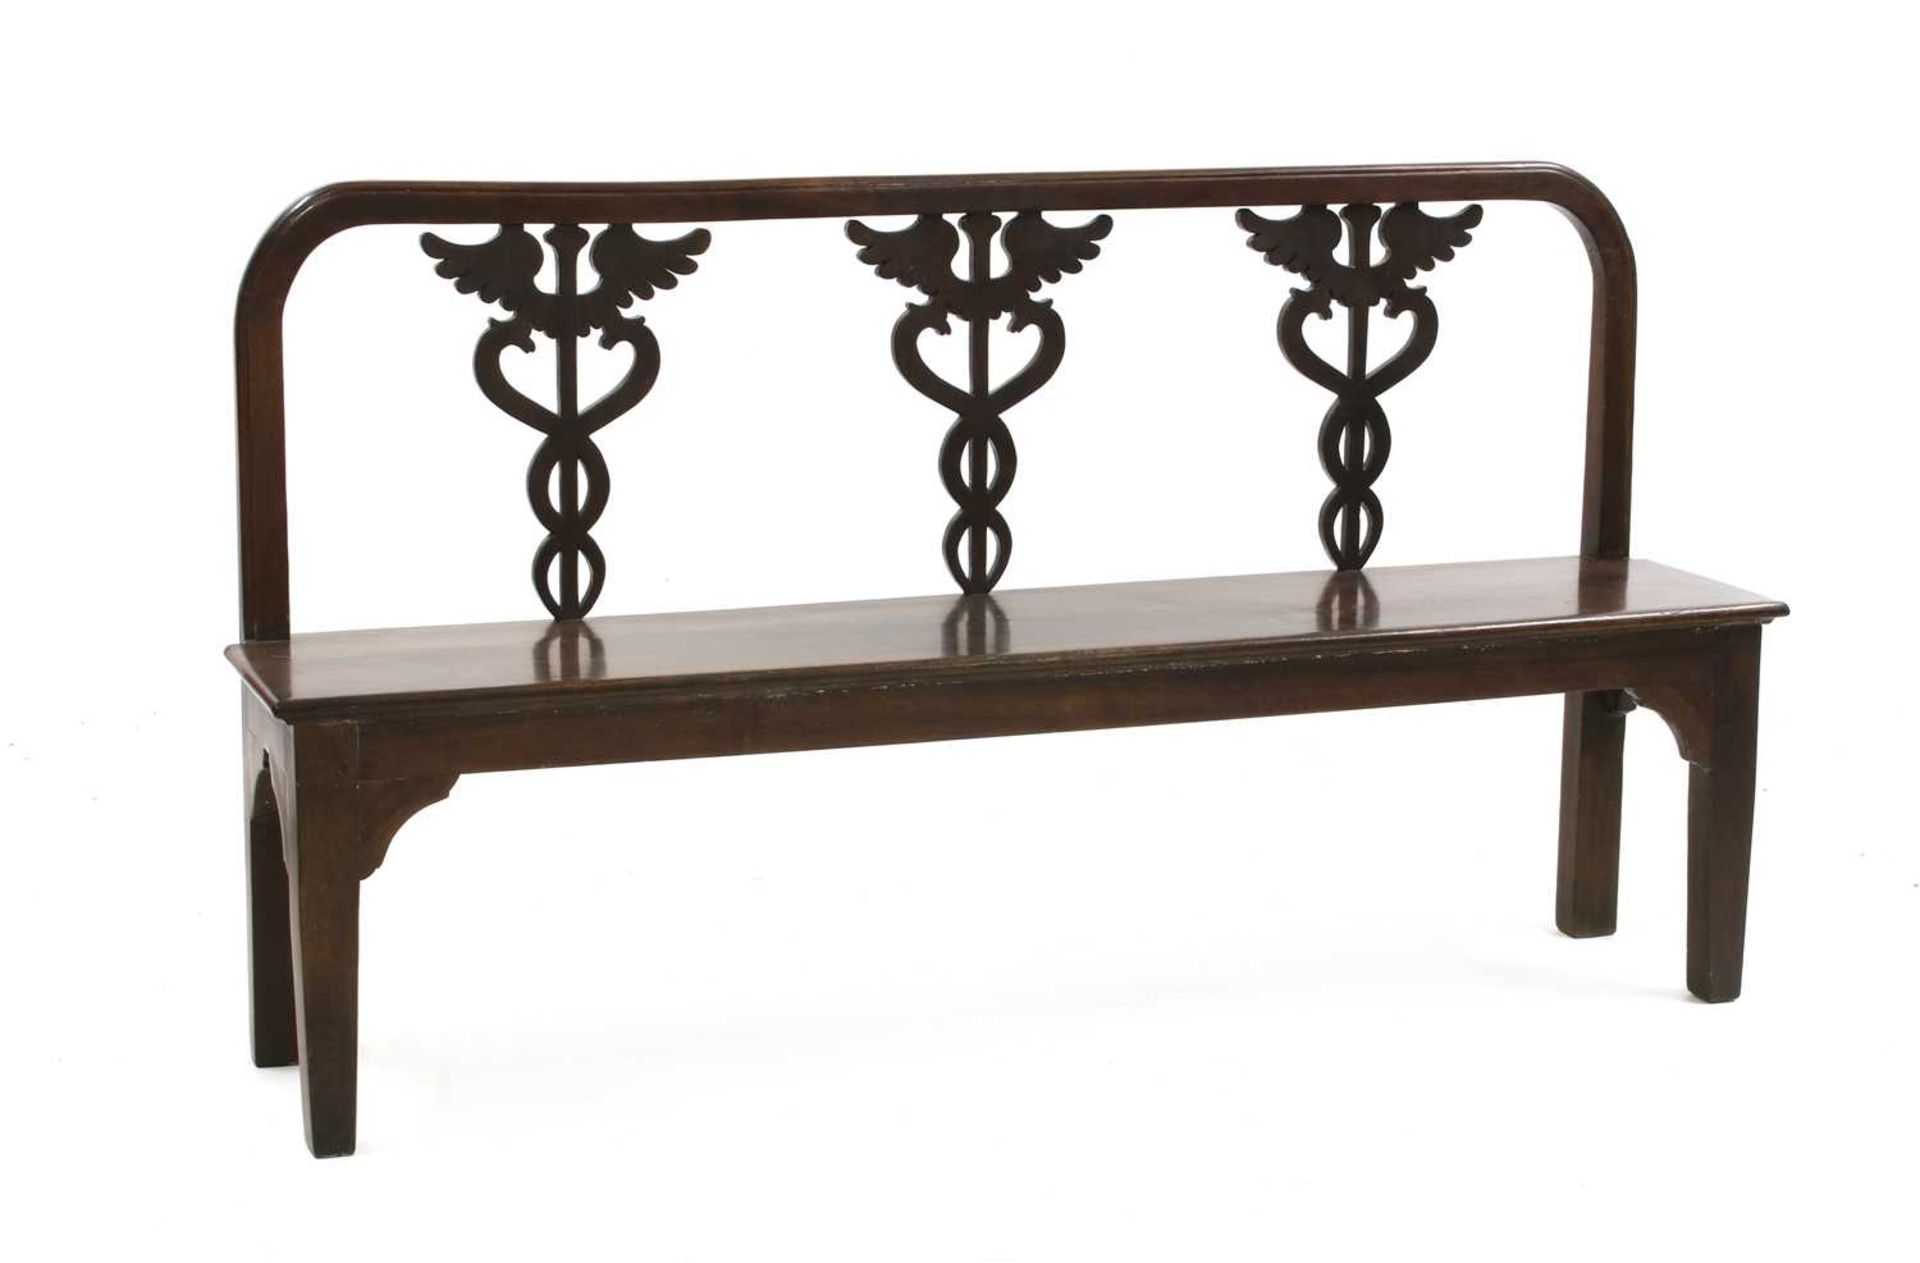 A pair of Italian neoclassical-style walnut hall seats, - Image 3 of 5